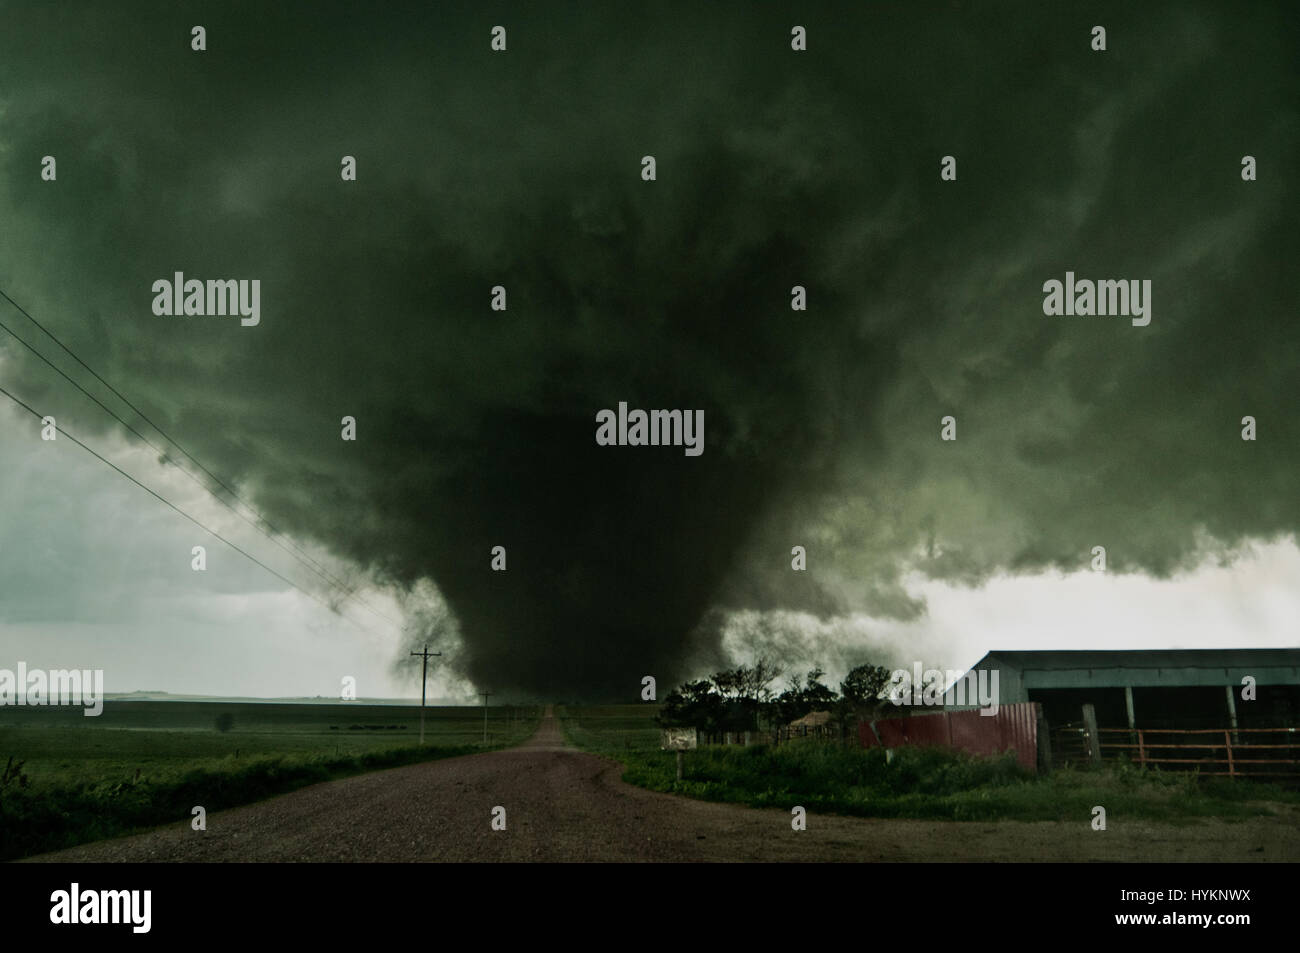 TORNADO ALLEY, USA: Coleridge, Nebraska. THE DEADLIEST weather events have been captured on camera by one lightning quick photographer. Incredible photographs show extreme weather from America’s Tornado Alley, renowned for the frequency of its storms. From terrifying lightning bolts to all-encompassing tornados, these pictures manage to capture to ferocity and atmosphere of these natural phenomena. Stock Photo